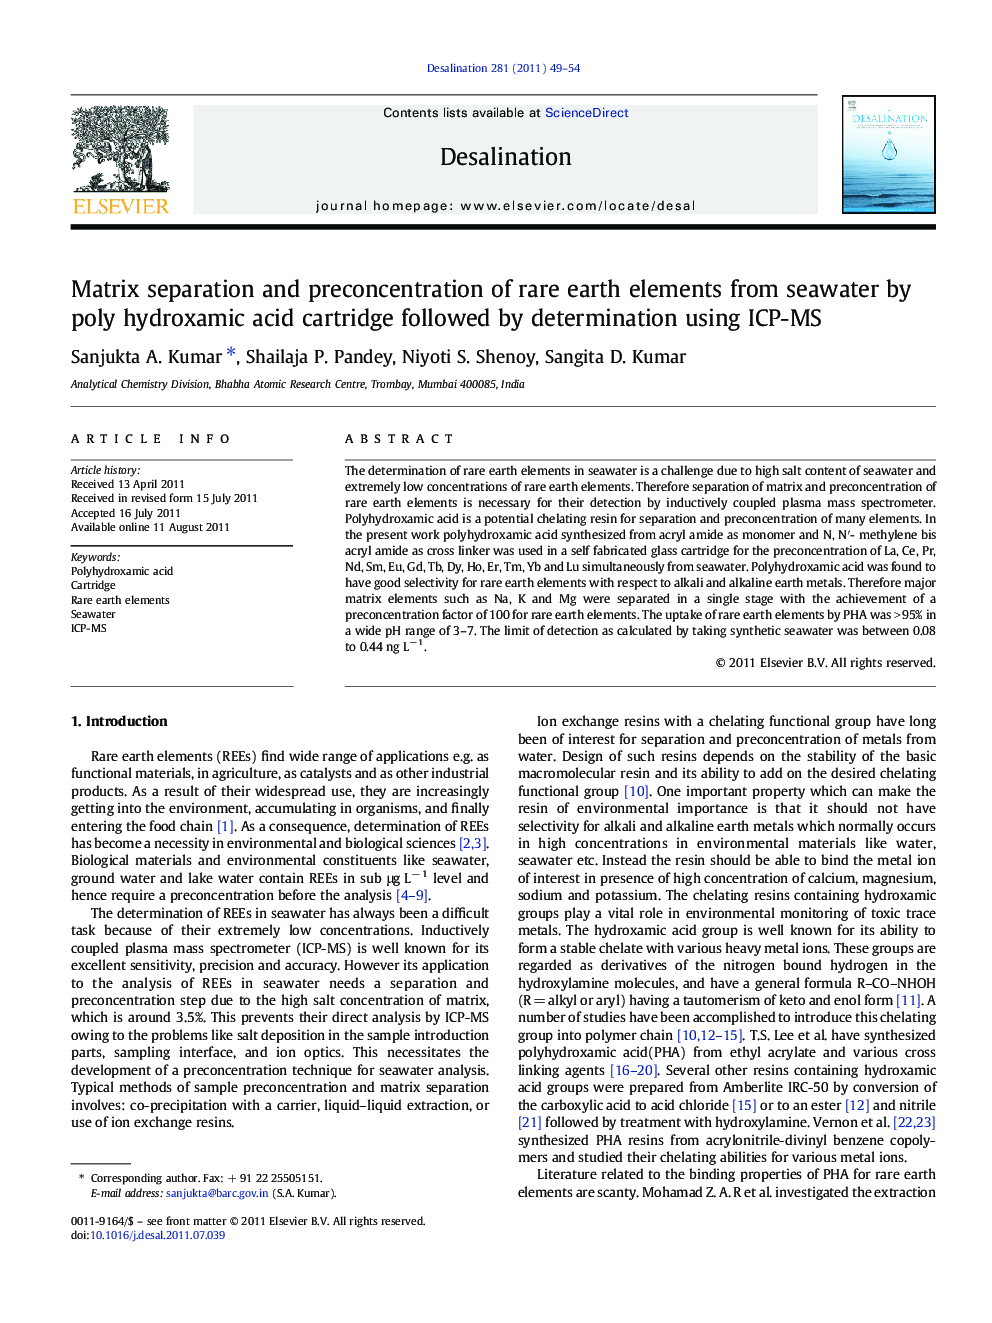 Matrix separation and preconcentration of rare earth elements from seawater by poly hydroxamic acid cartridge followed by determination using ICP-MS